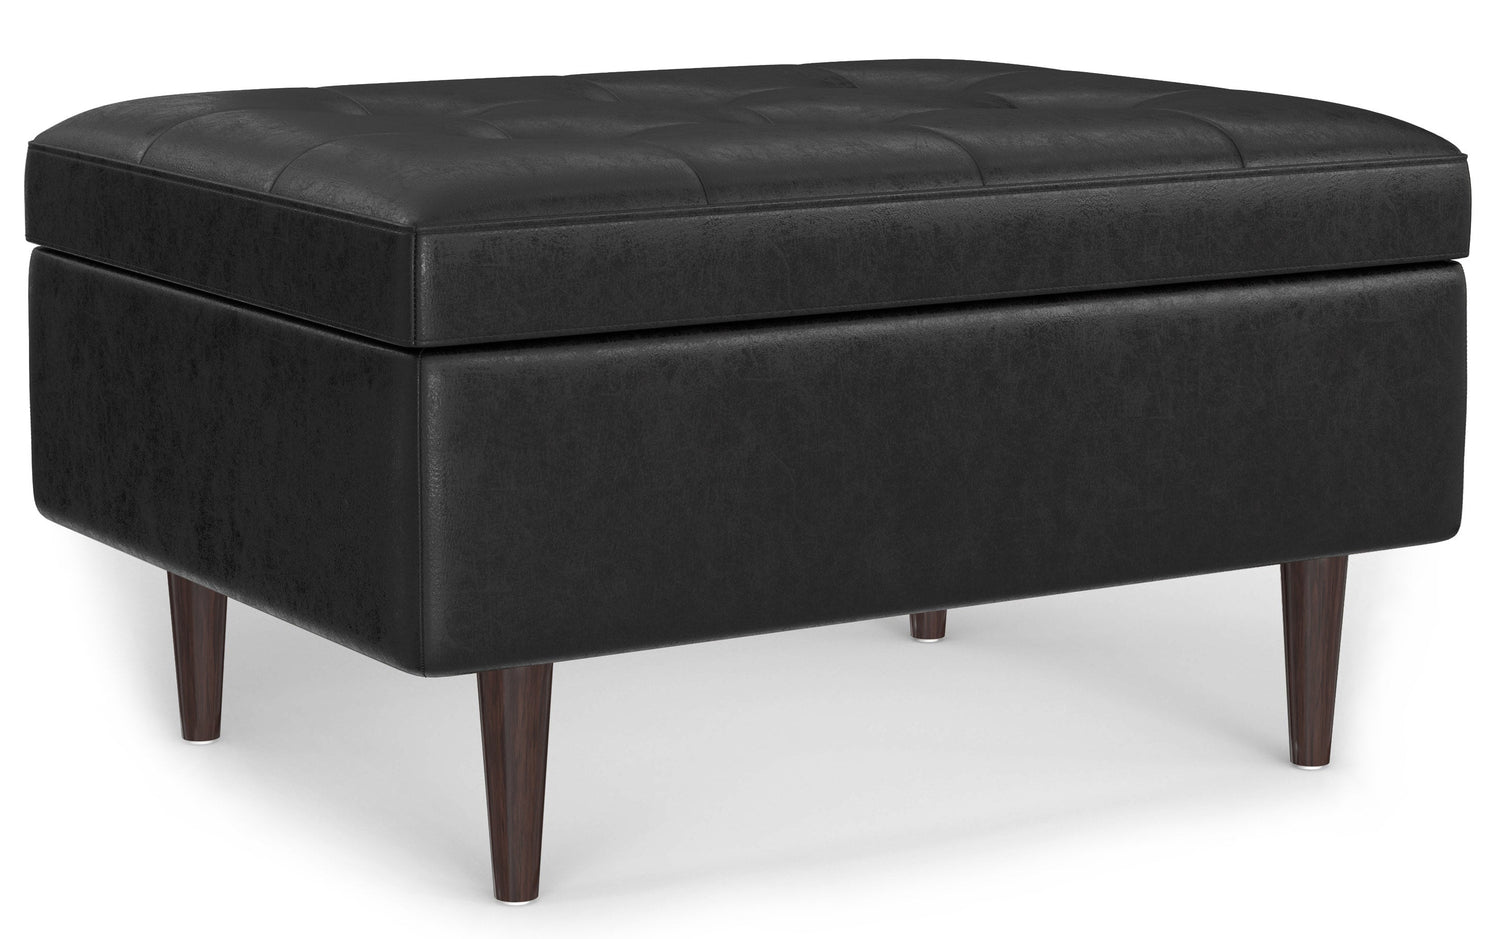 Distressed Black Distressed Vegan Leather | Shay Mid Century Small Square Coffee Table Storage Ottoman